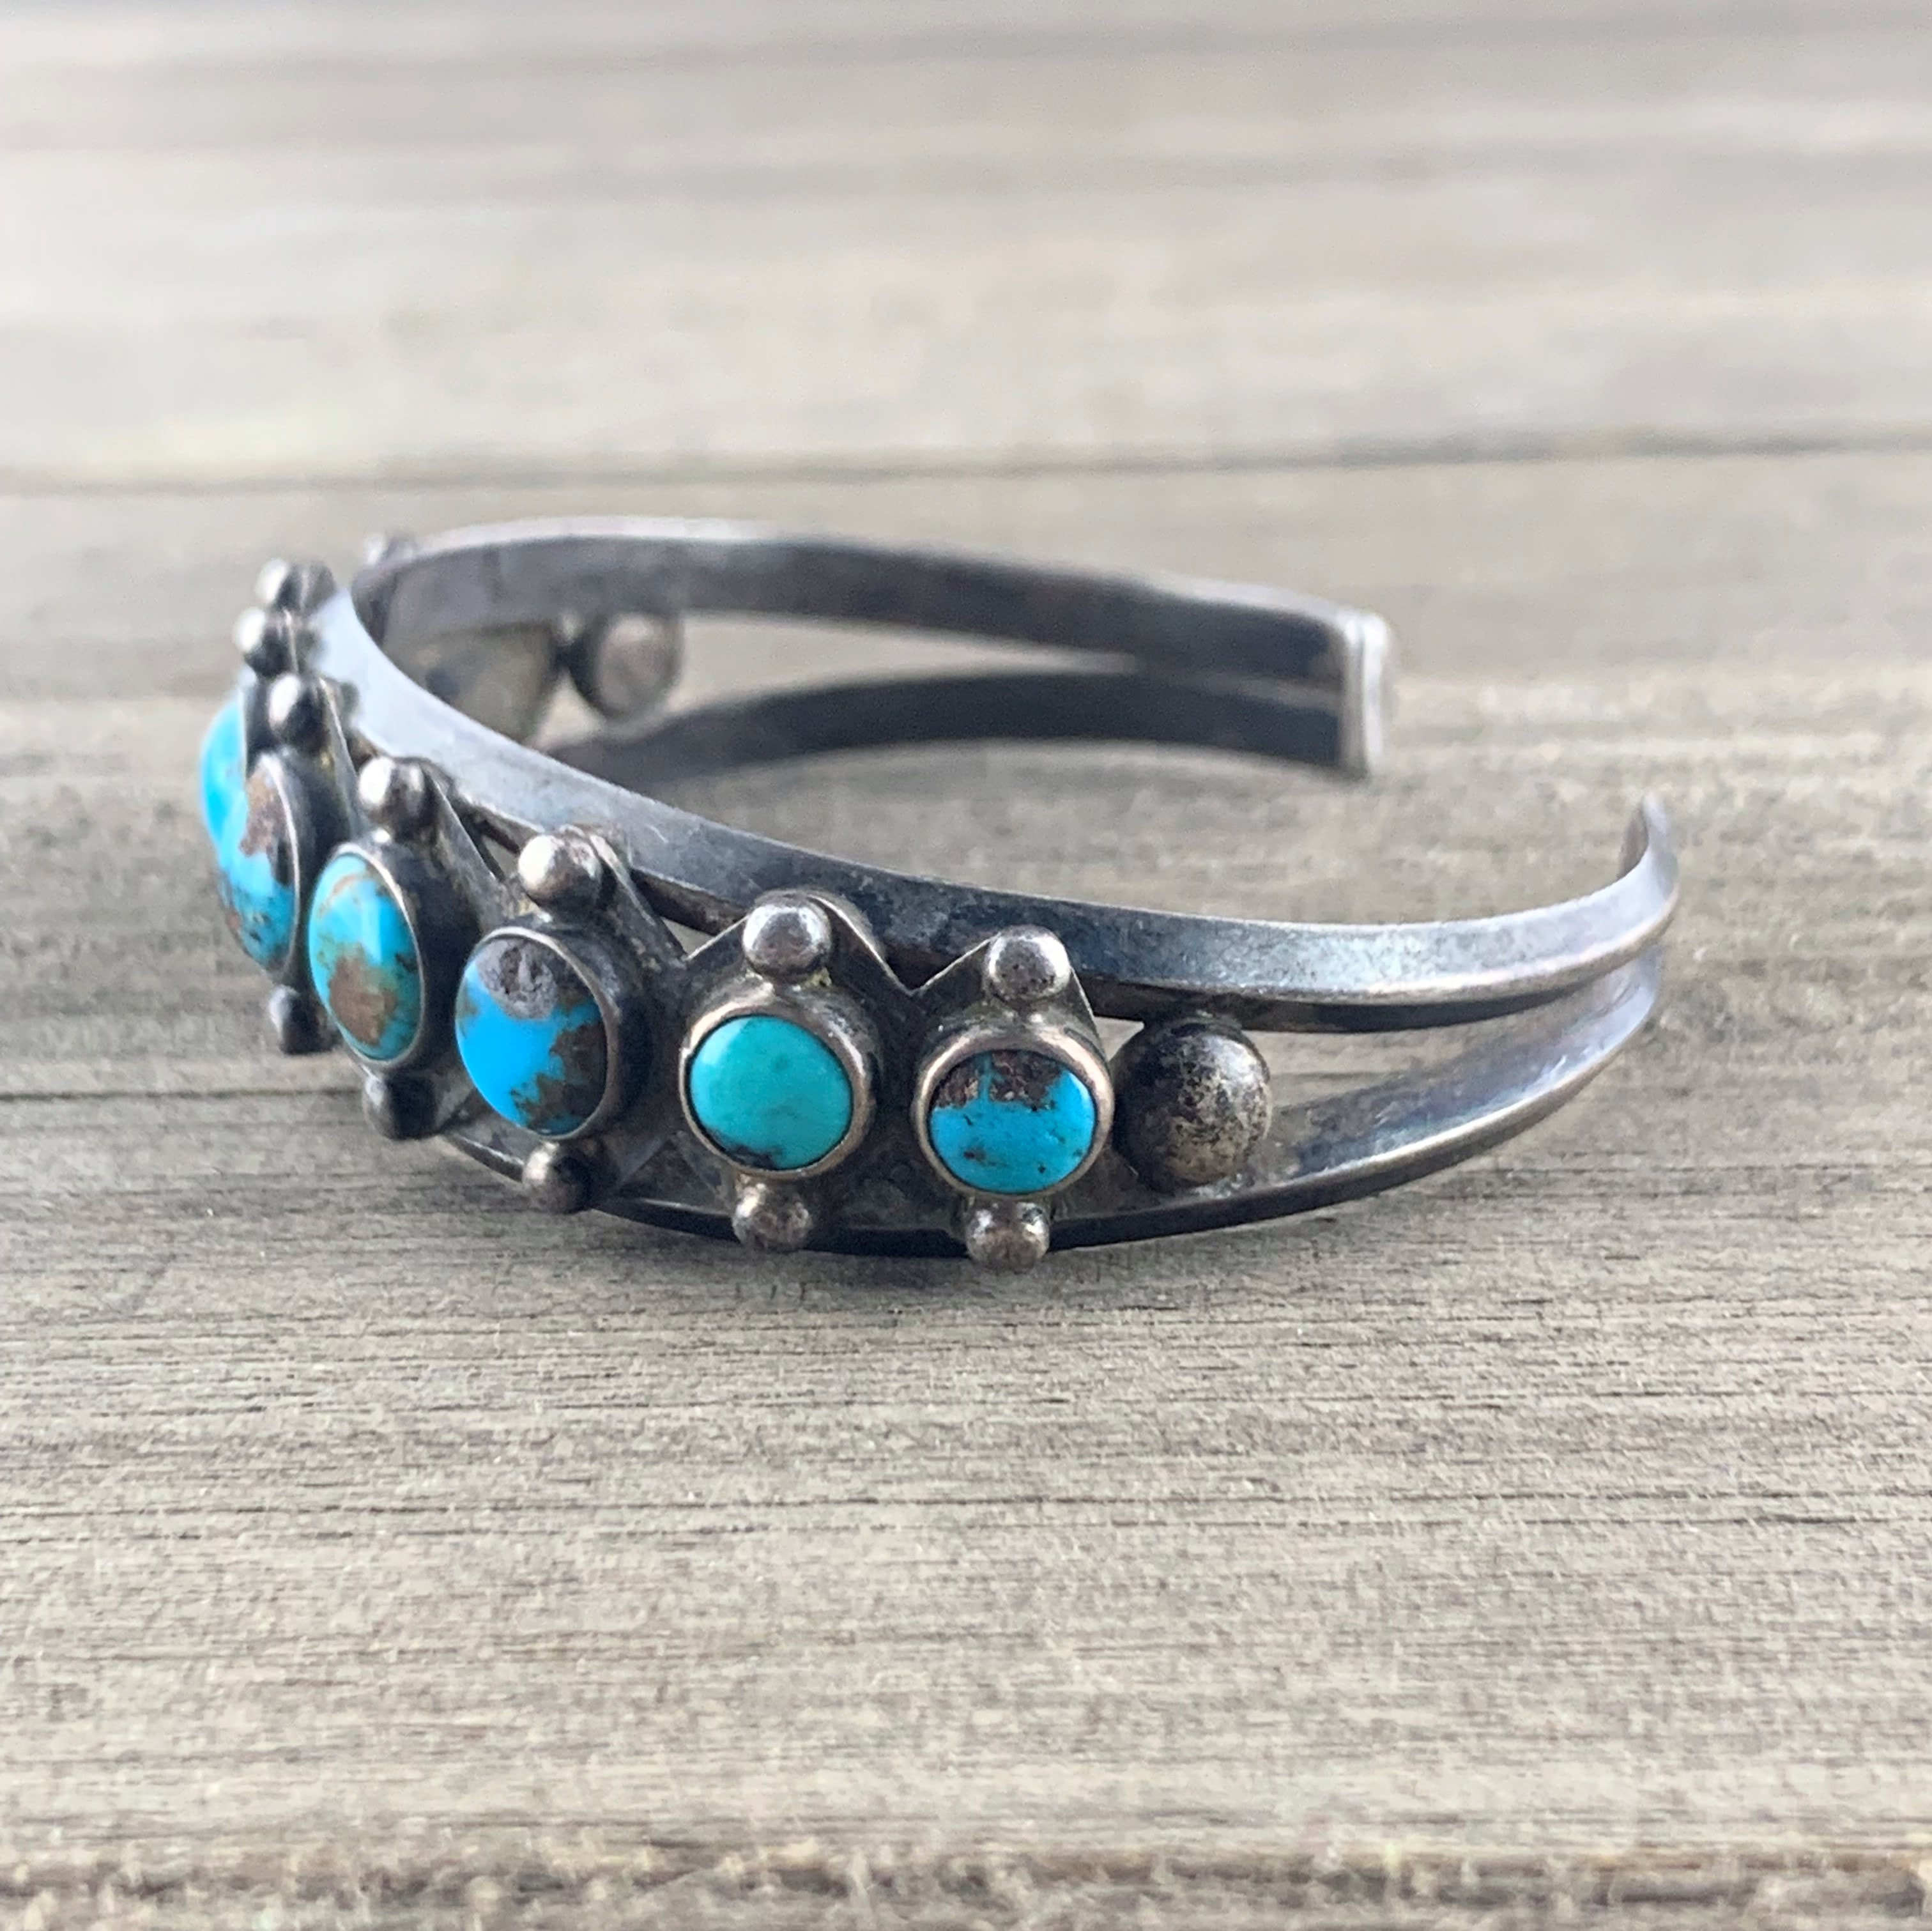 Vintage Native American Sterling Silver Cluster Turquoise Bracelet For  Women - Mountain Of Jewels Jewelry & Watches:Ethnic, Regional & Tribal: Bracelets & Charms